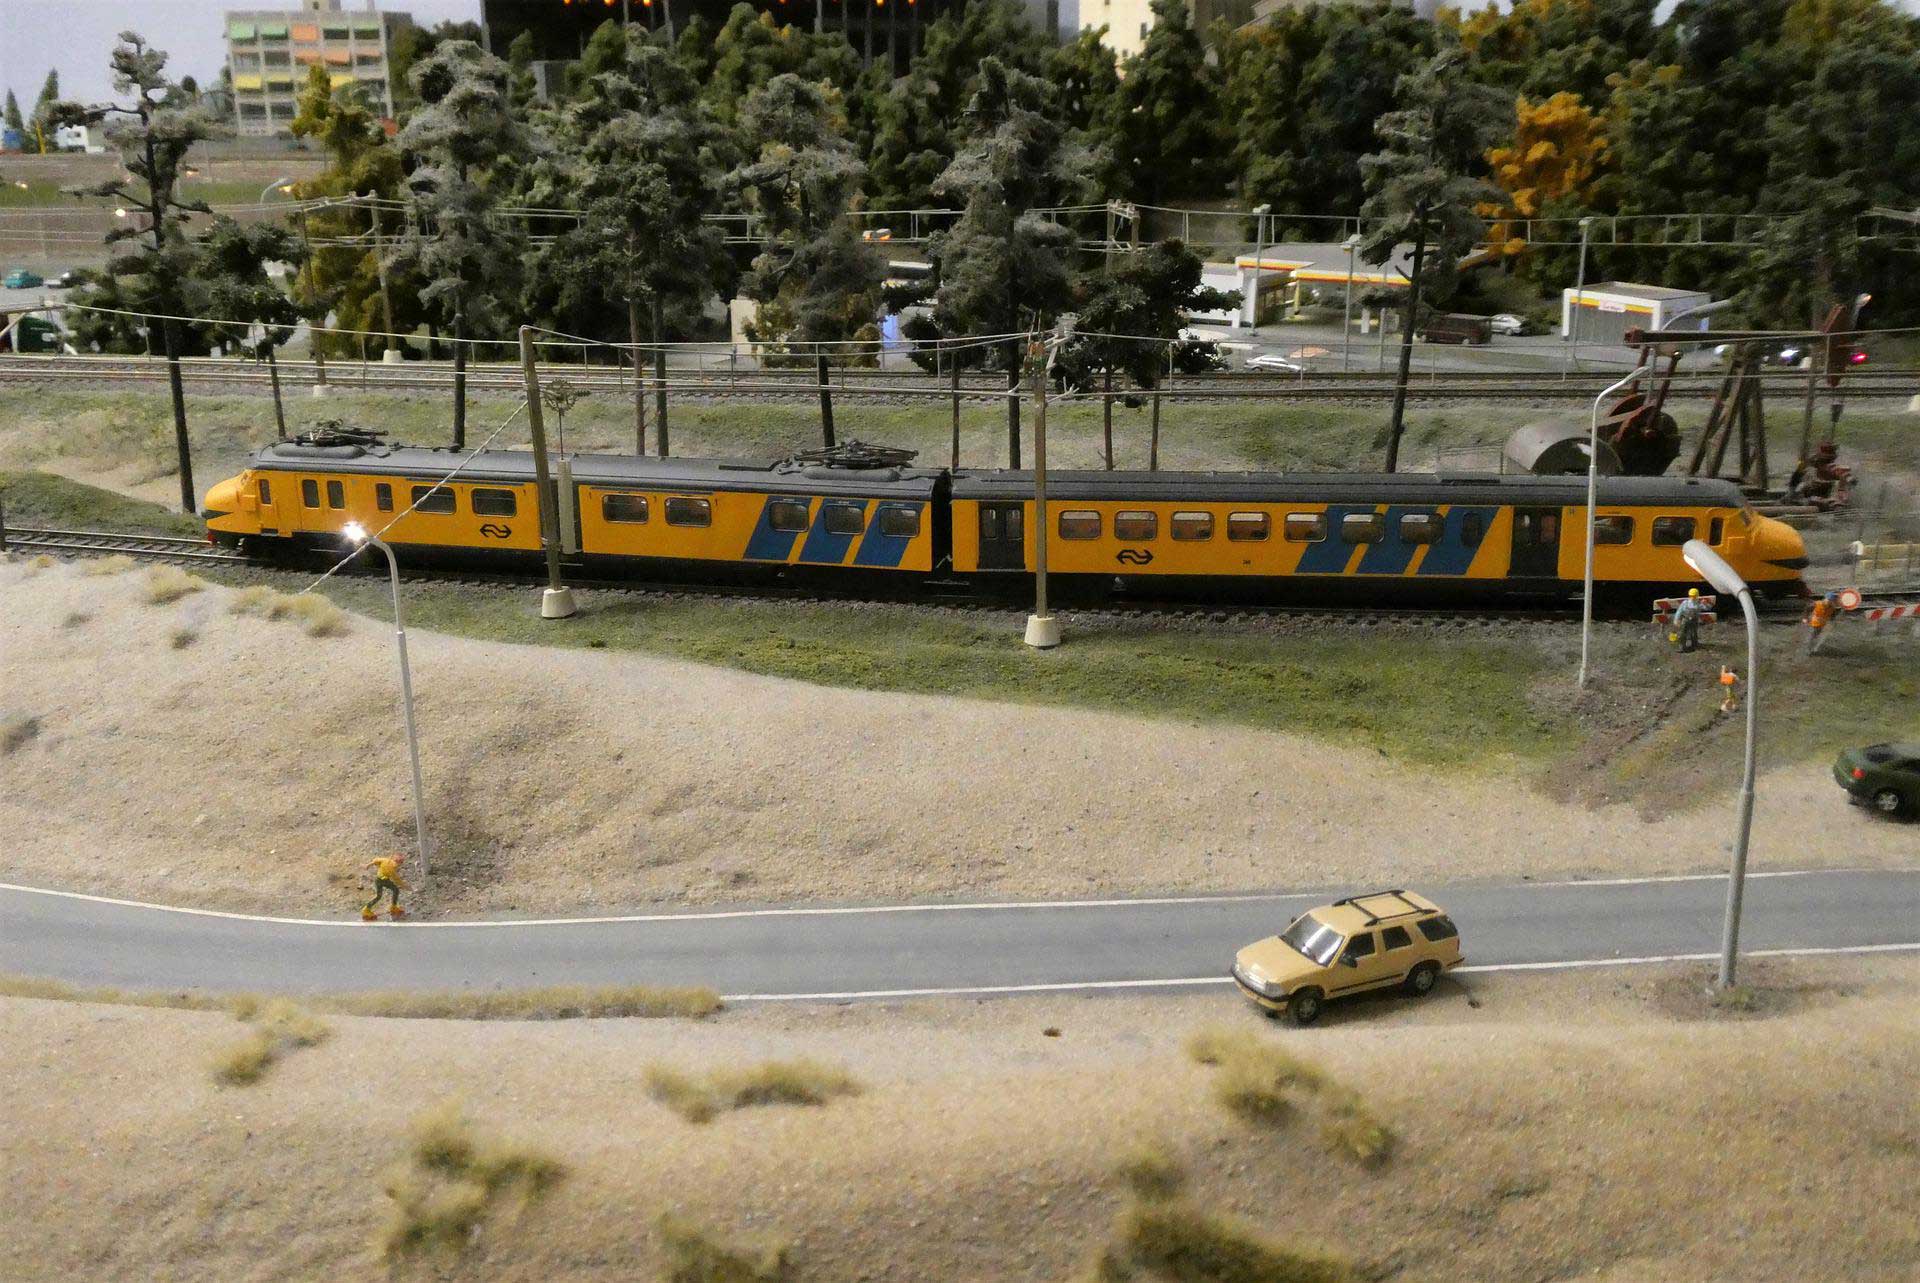 model railway scene with tufts of grass